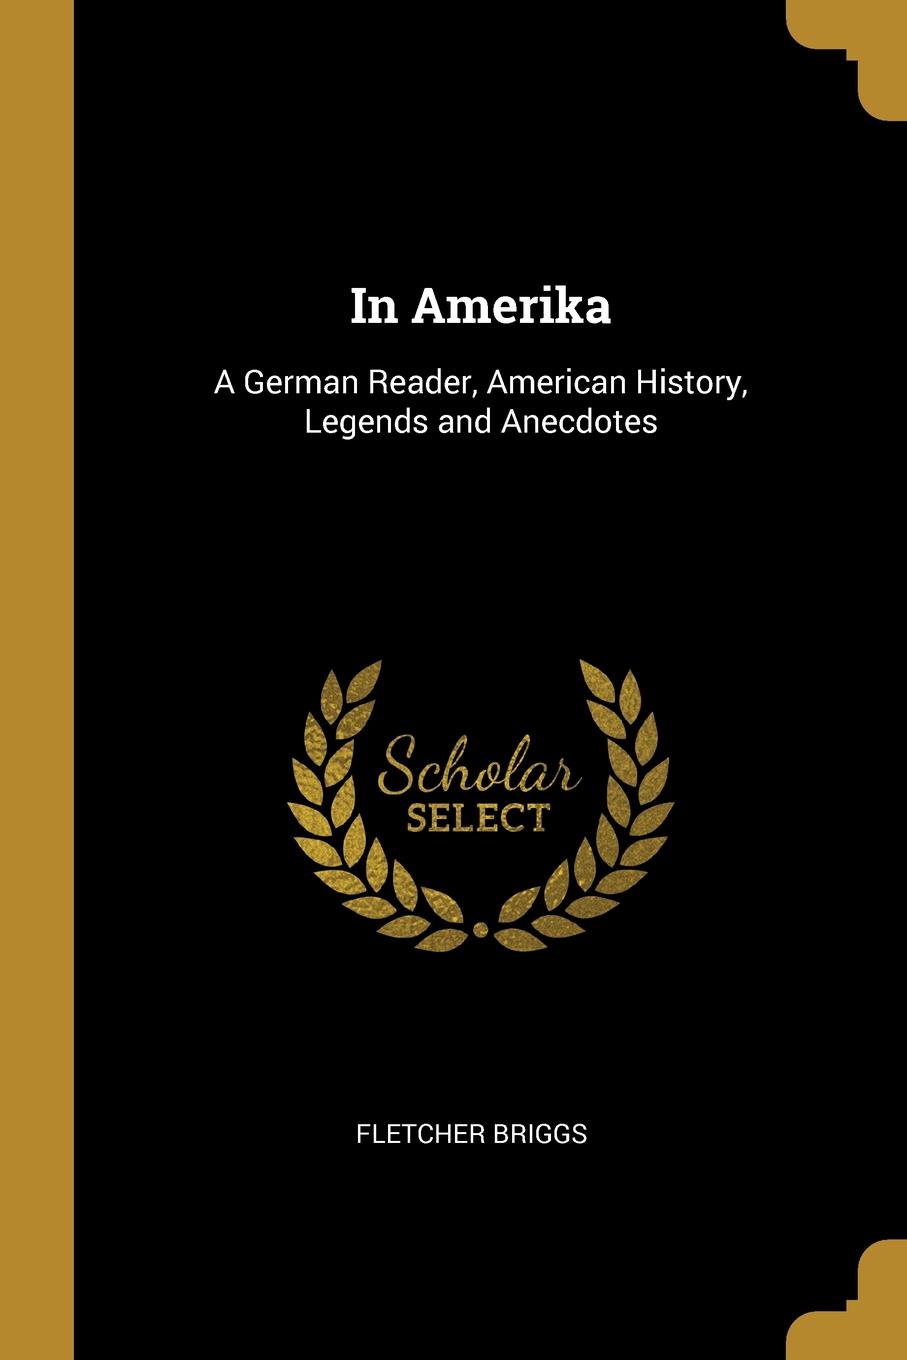 In Amerika. A German Reader, American History, Legends and Anecdotes